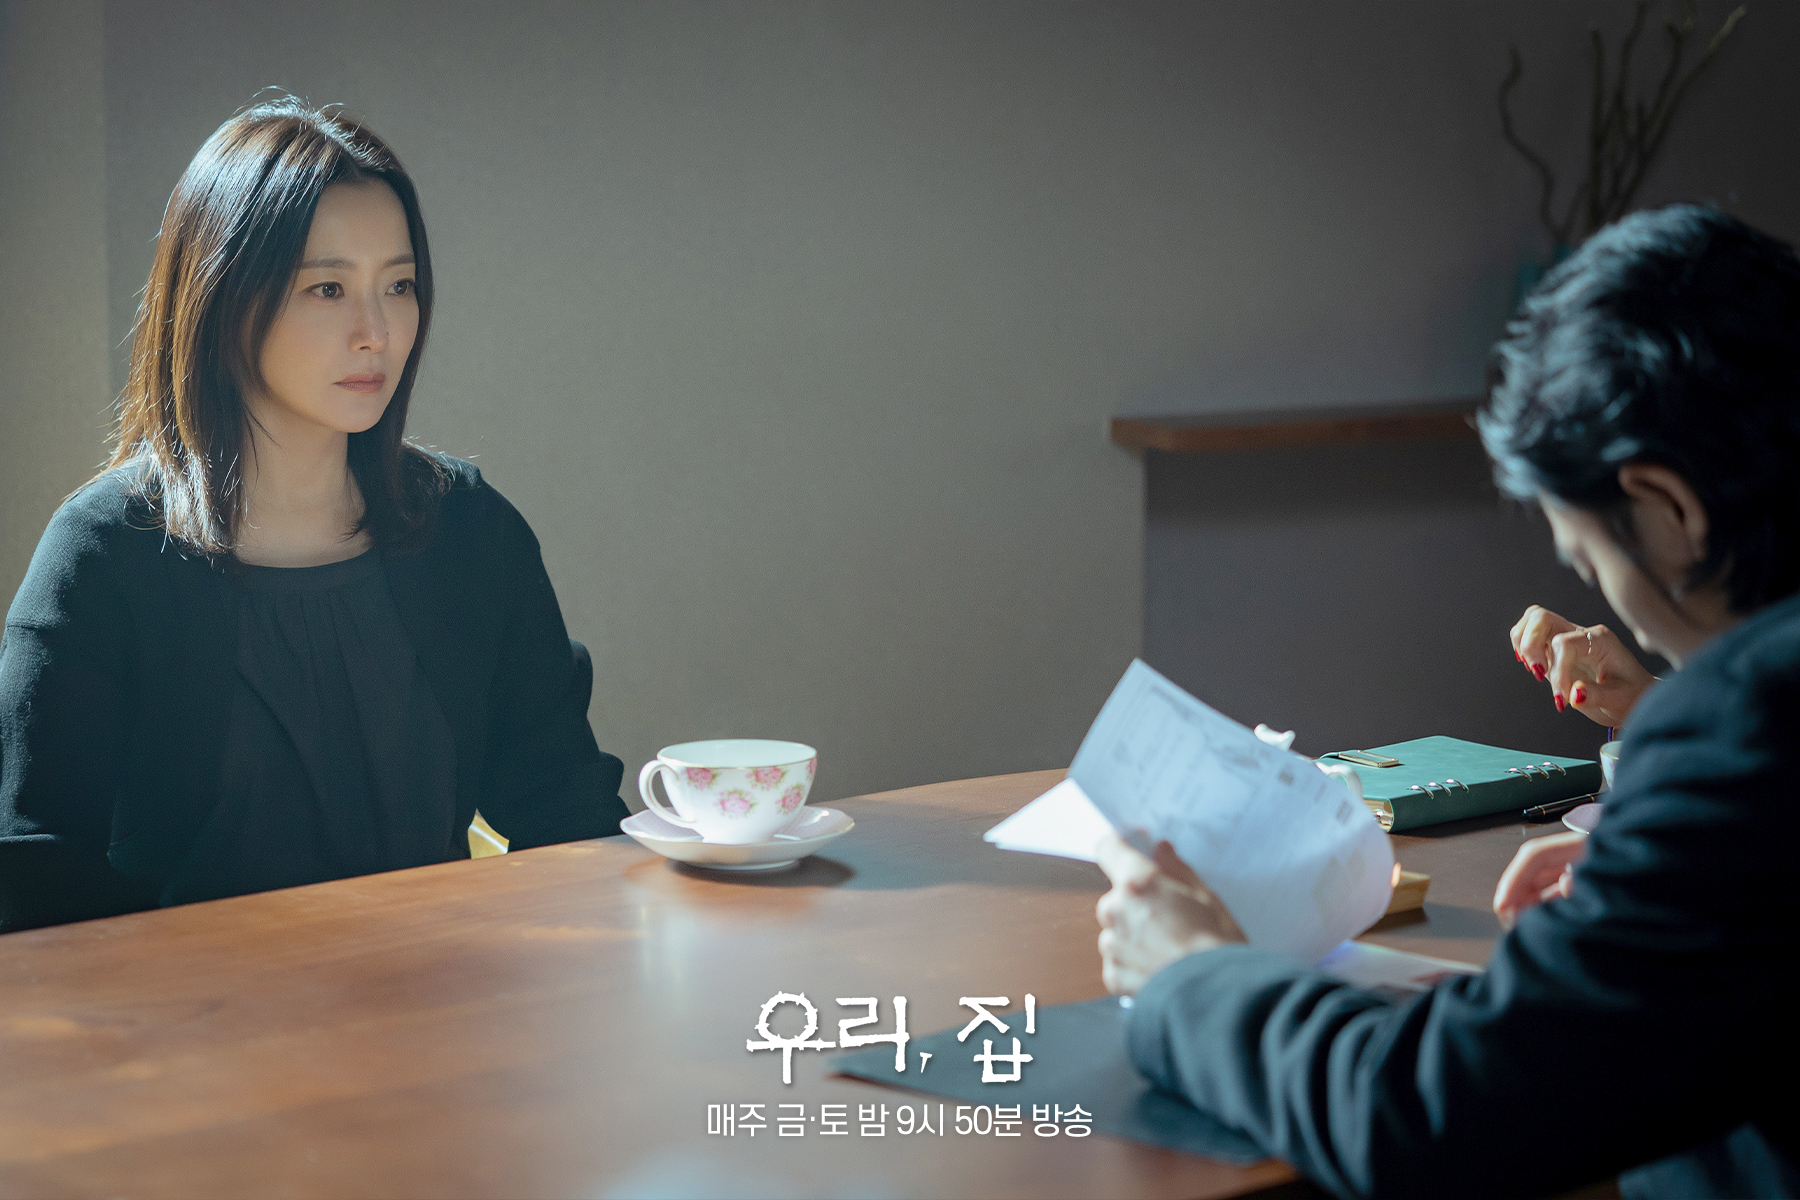 Kim Hee Sun And Lee Hye Young Persuade Yang Jae Hyun To Help Them Stop The Villain In 